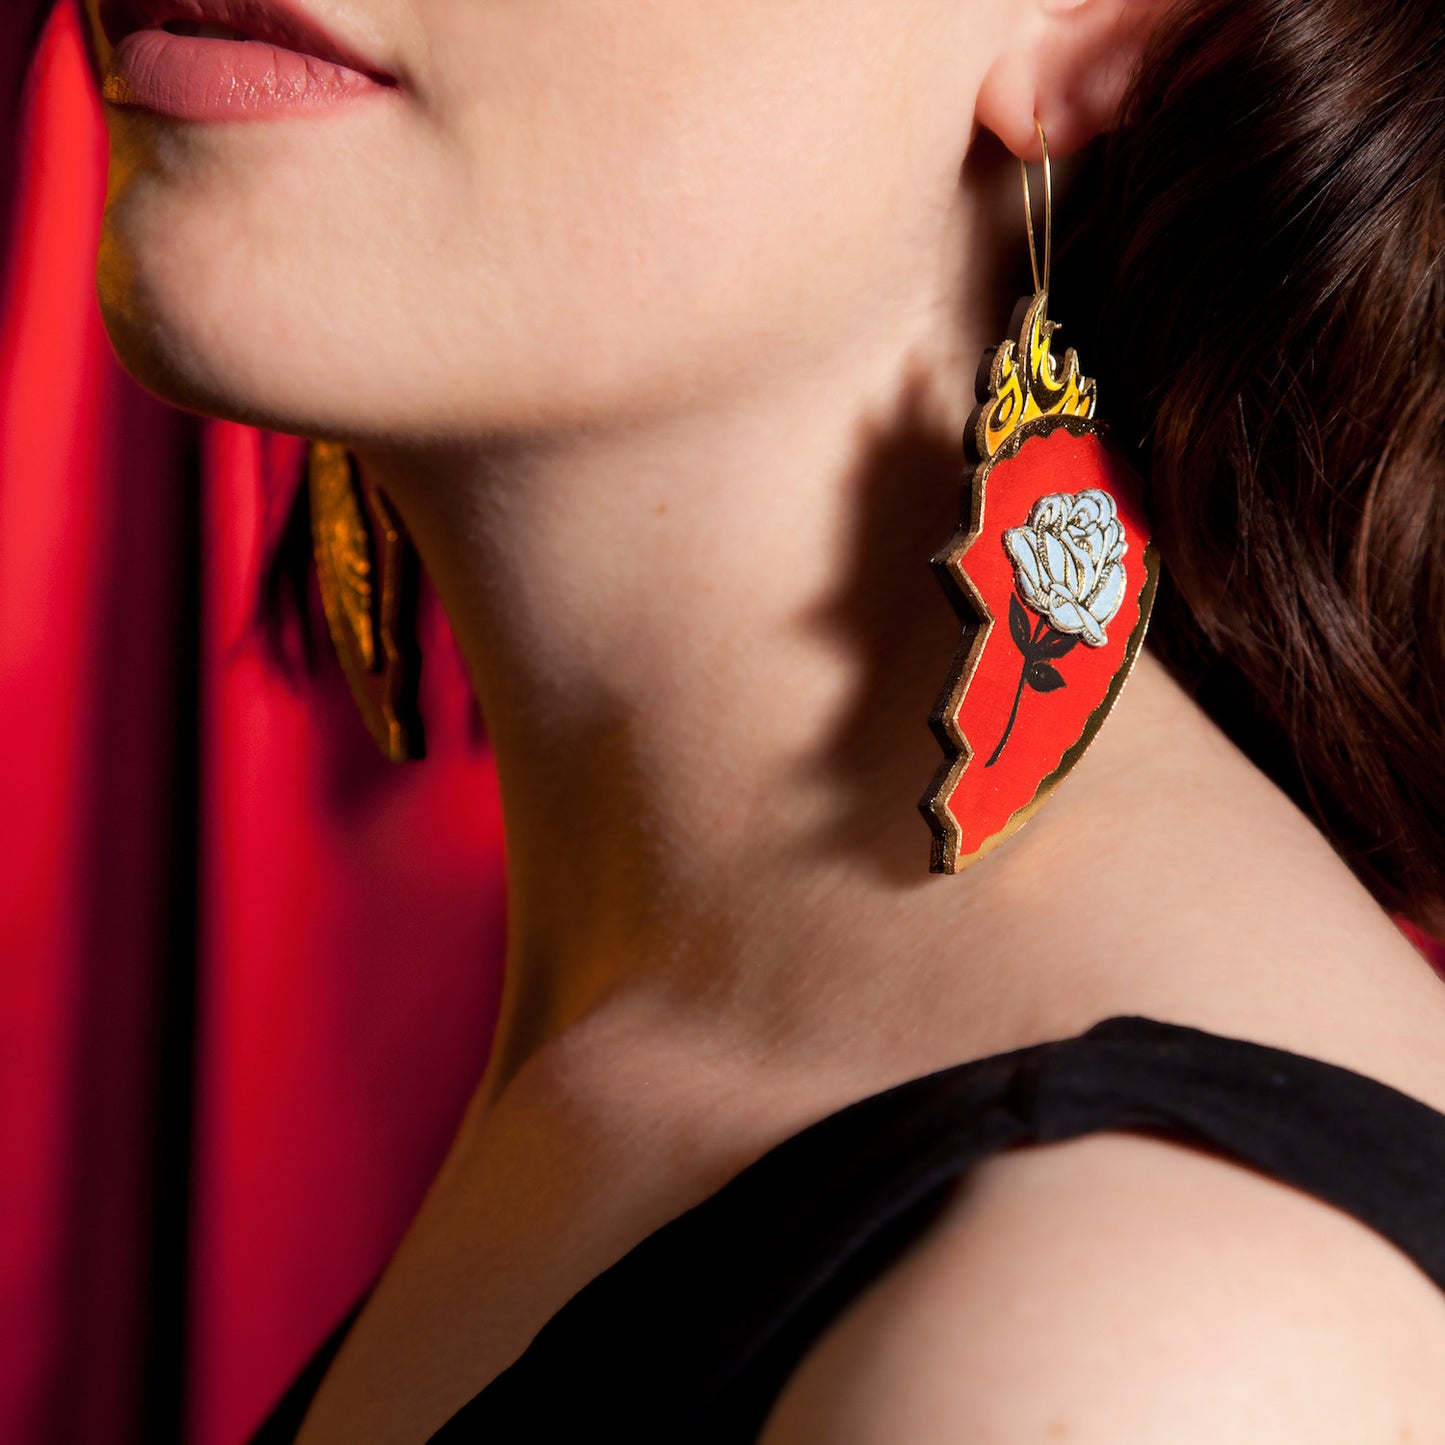  red leather broken heart pendants & earrings, with golden owls, flames & blue roses on model, close crop